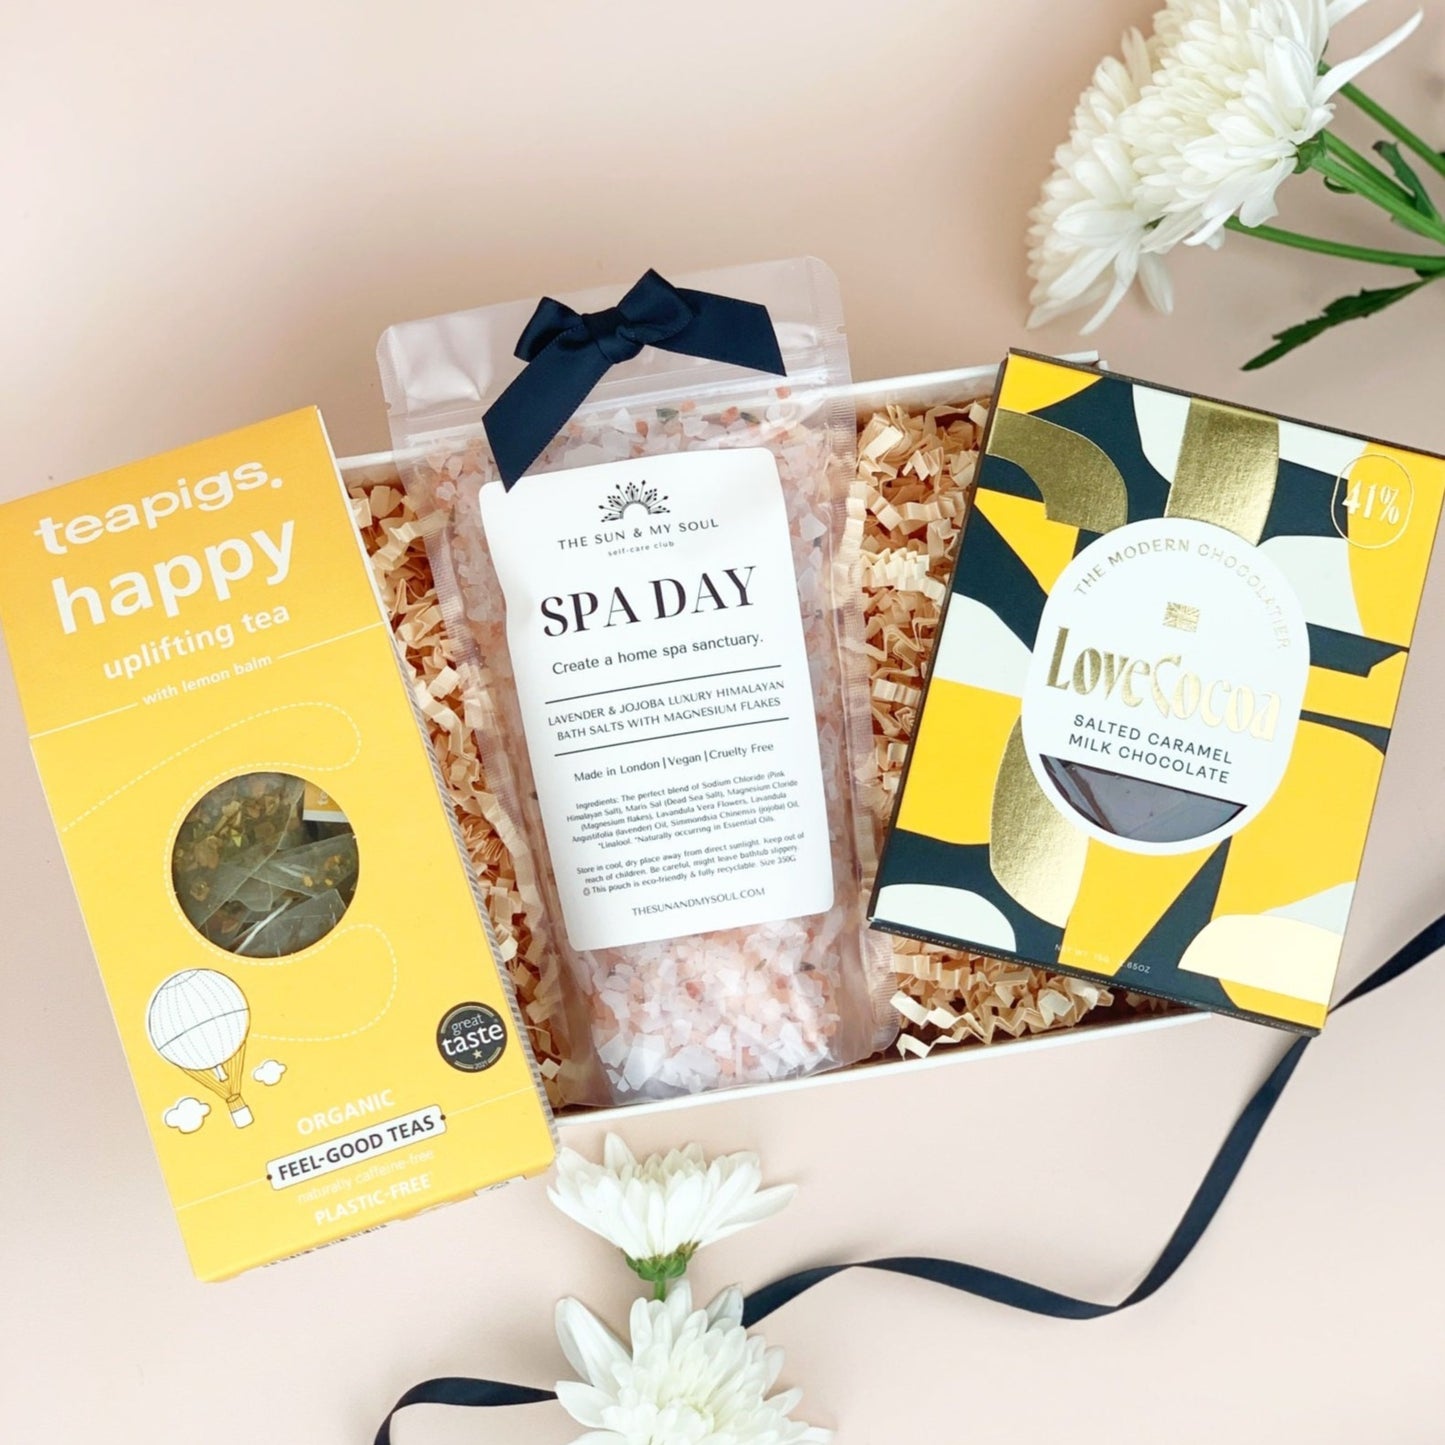 Recharge and Rejuvenate Uplifting Self-care Gift Box